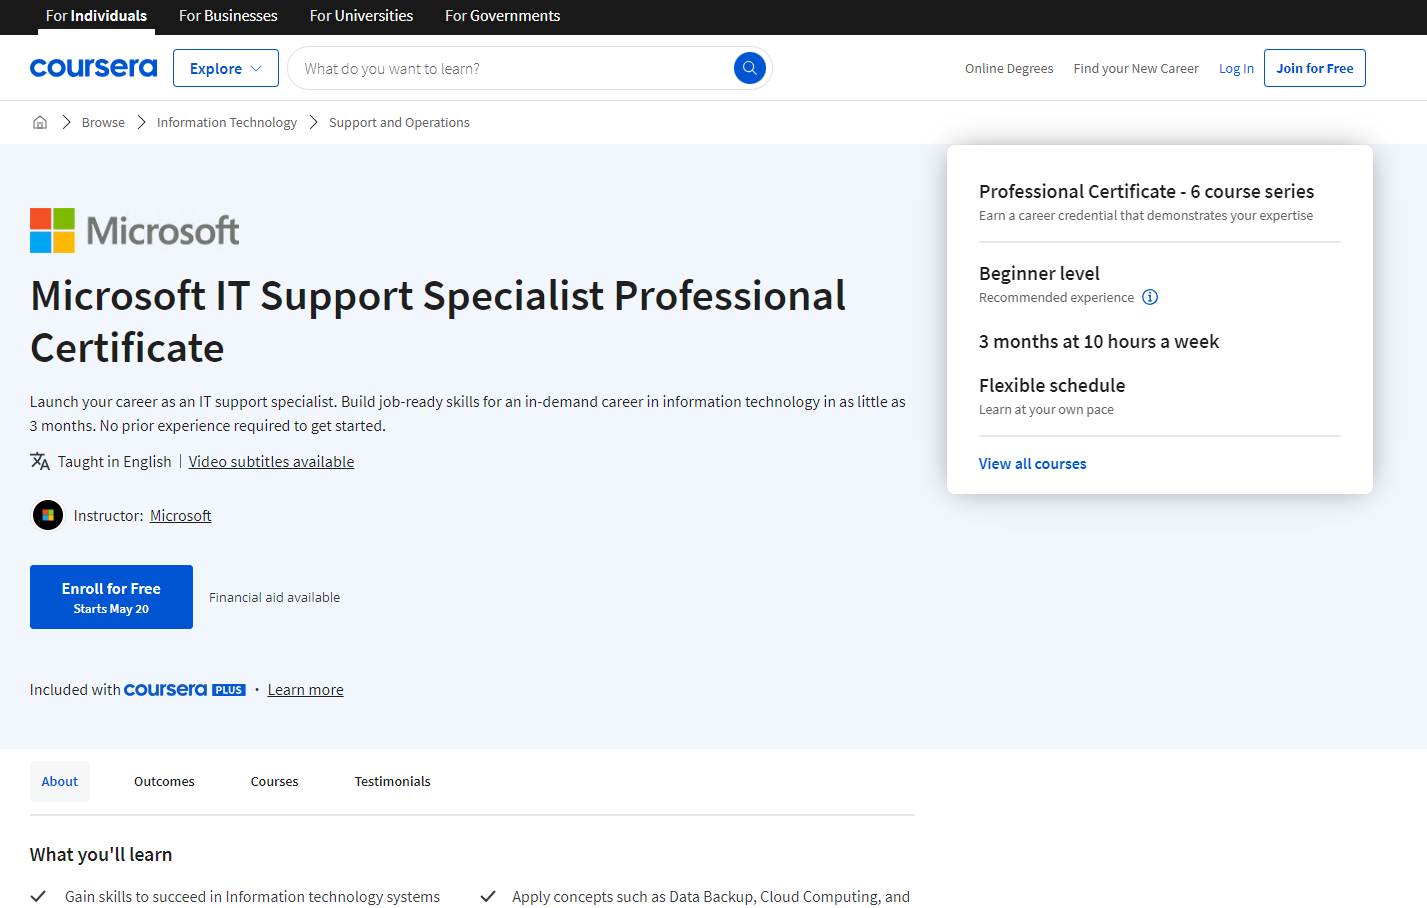 Microsoft provides 4 new entry-level certificates to Coursera